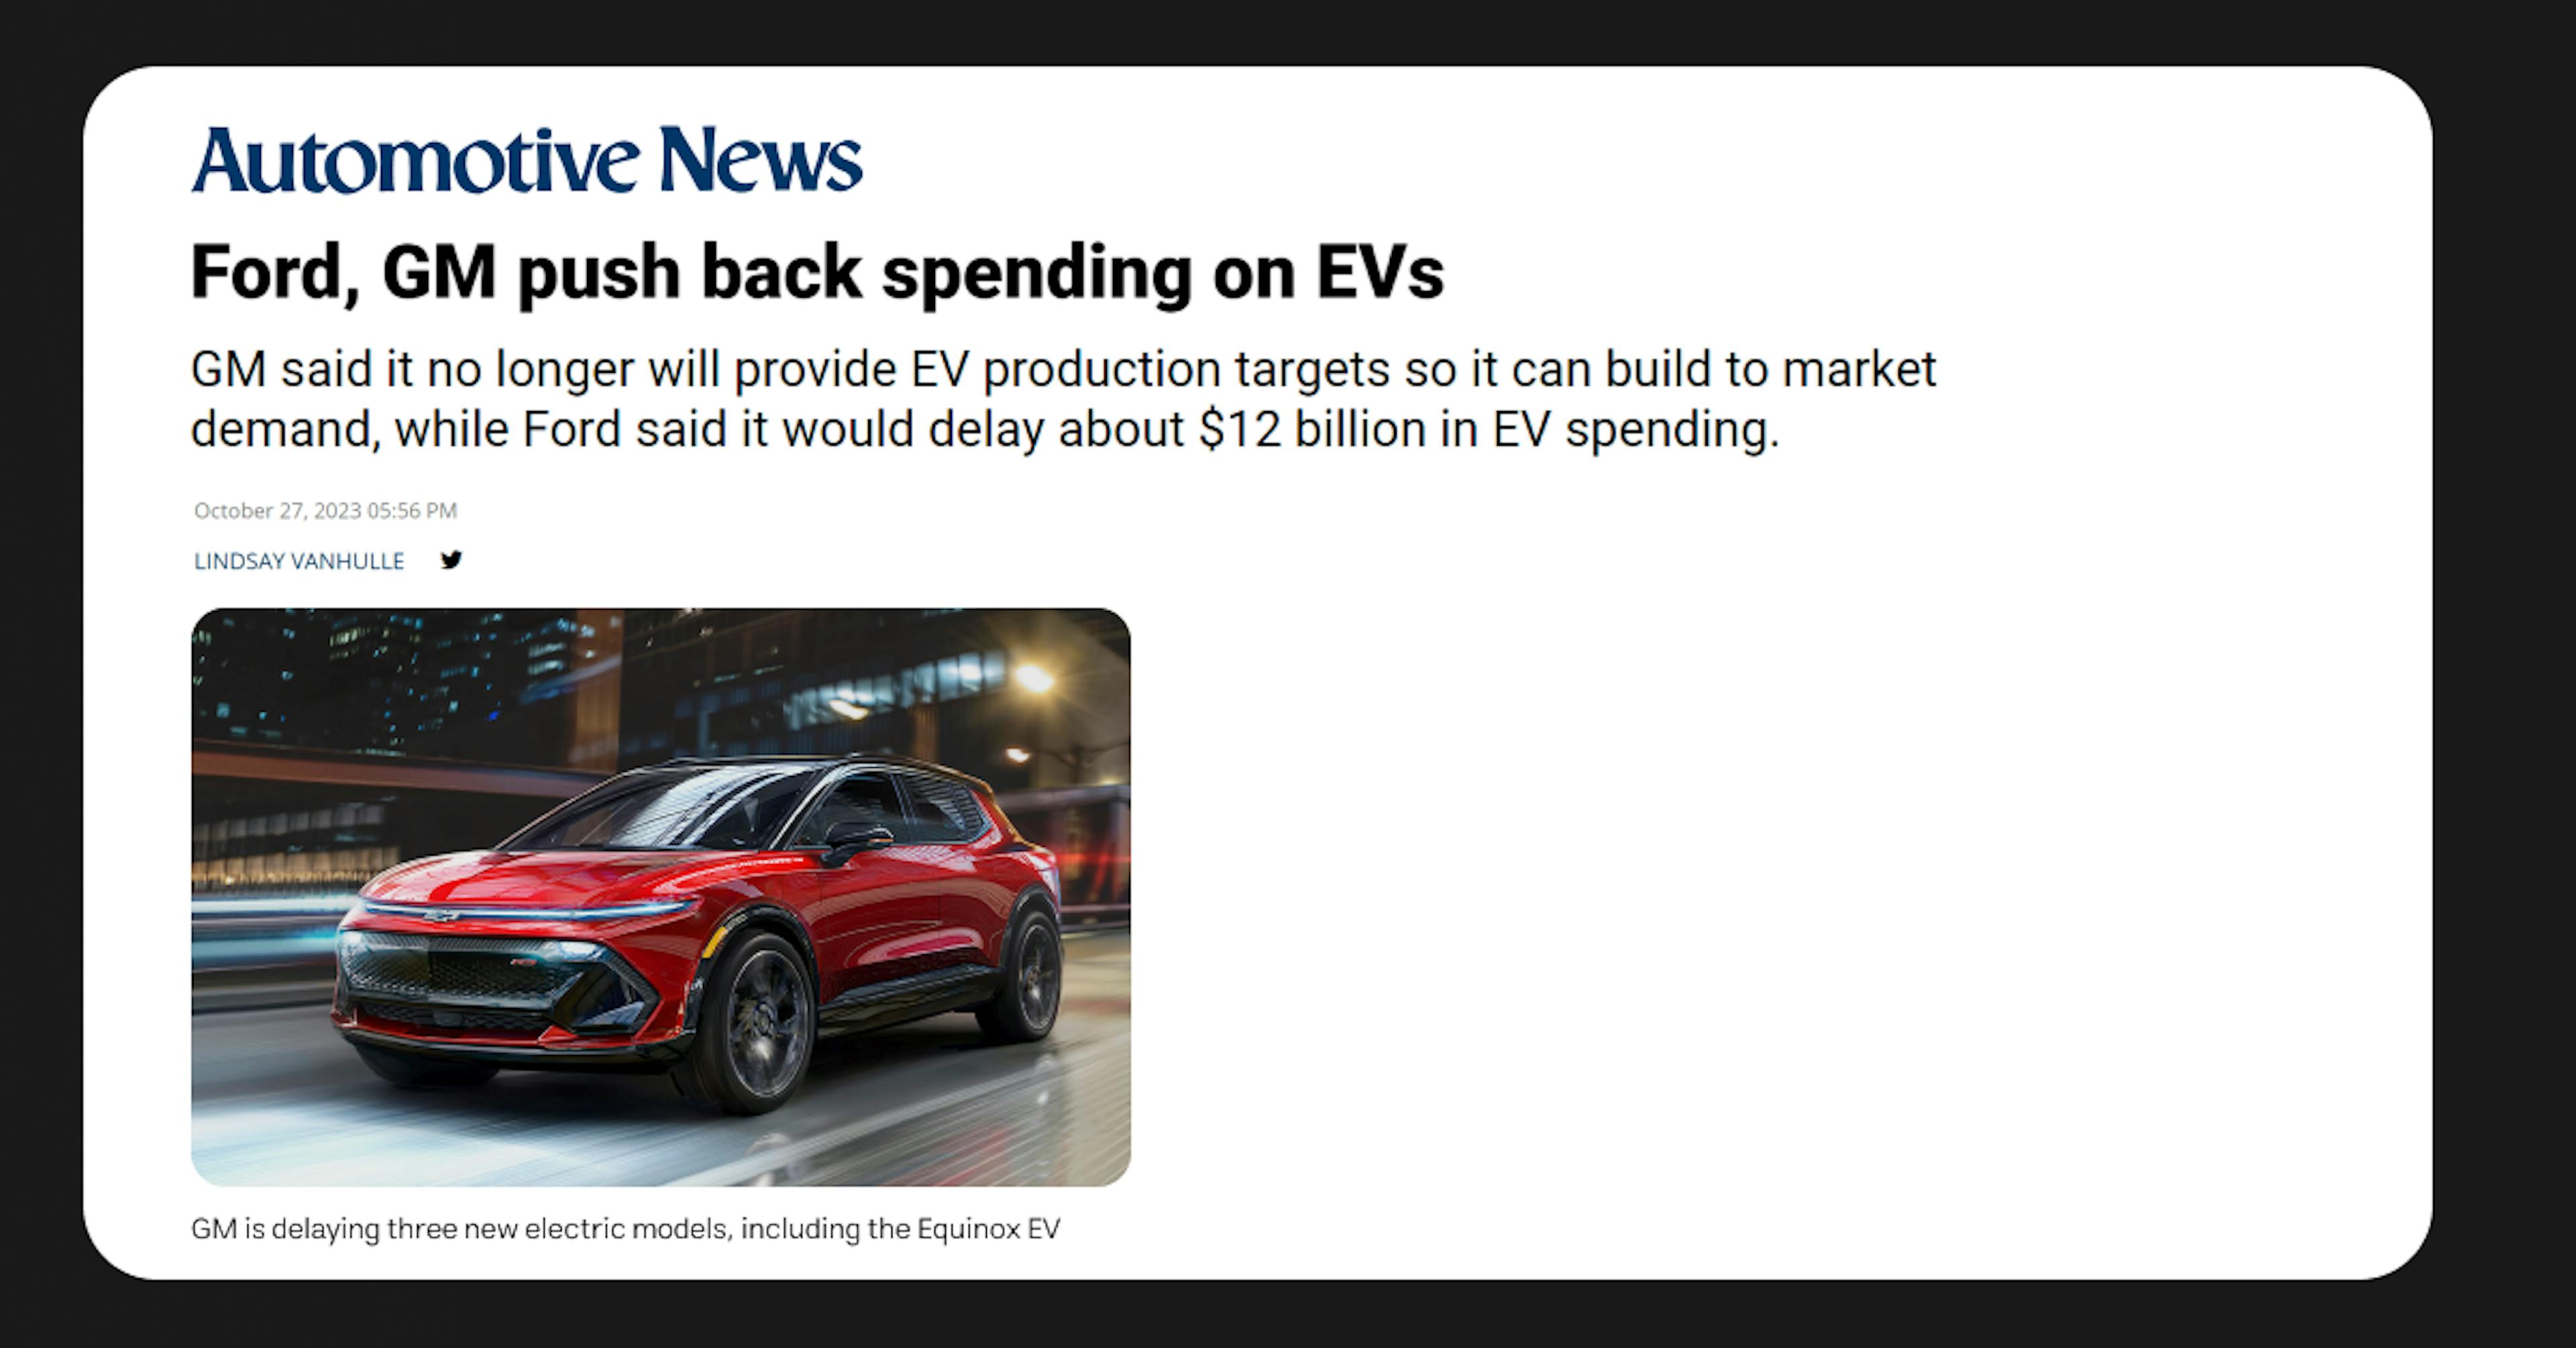 Ford & GM announced a delay in EV spending just this year